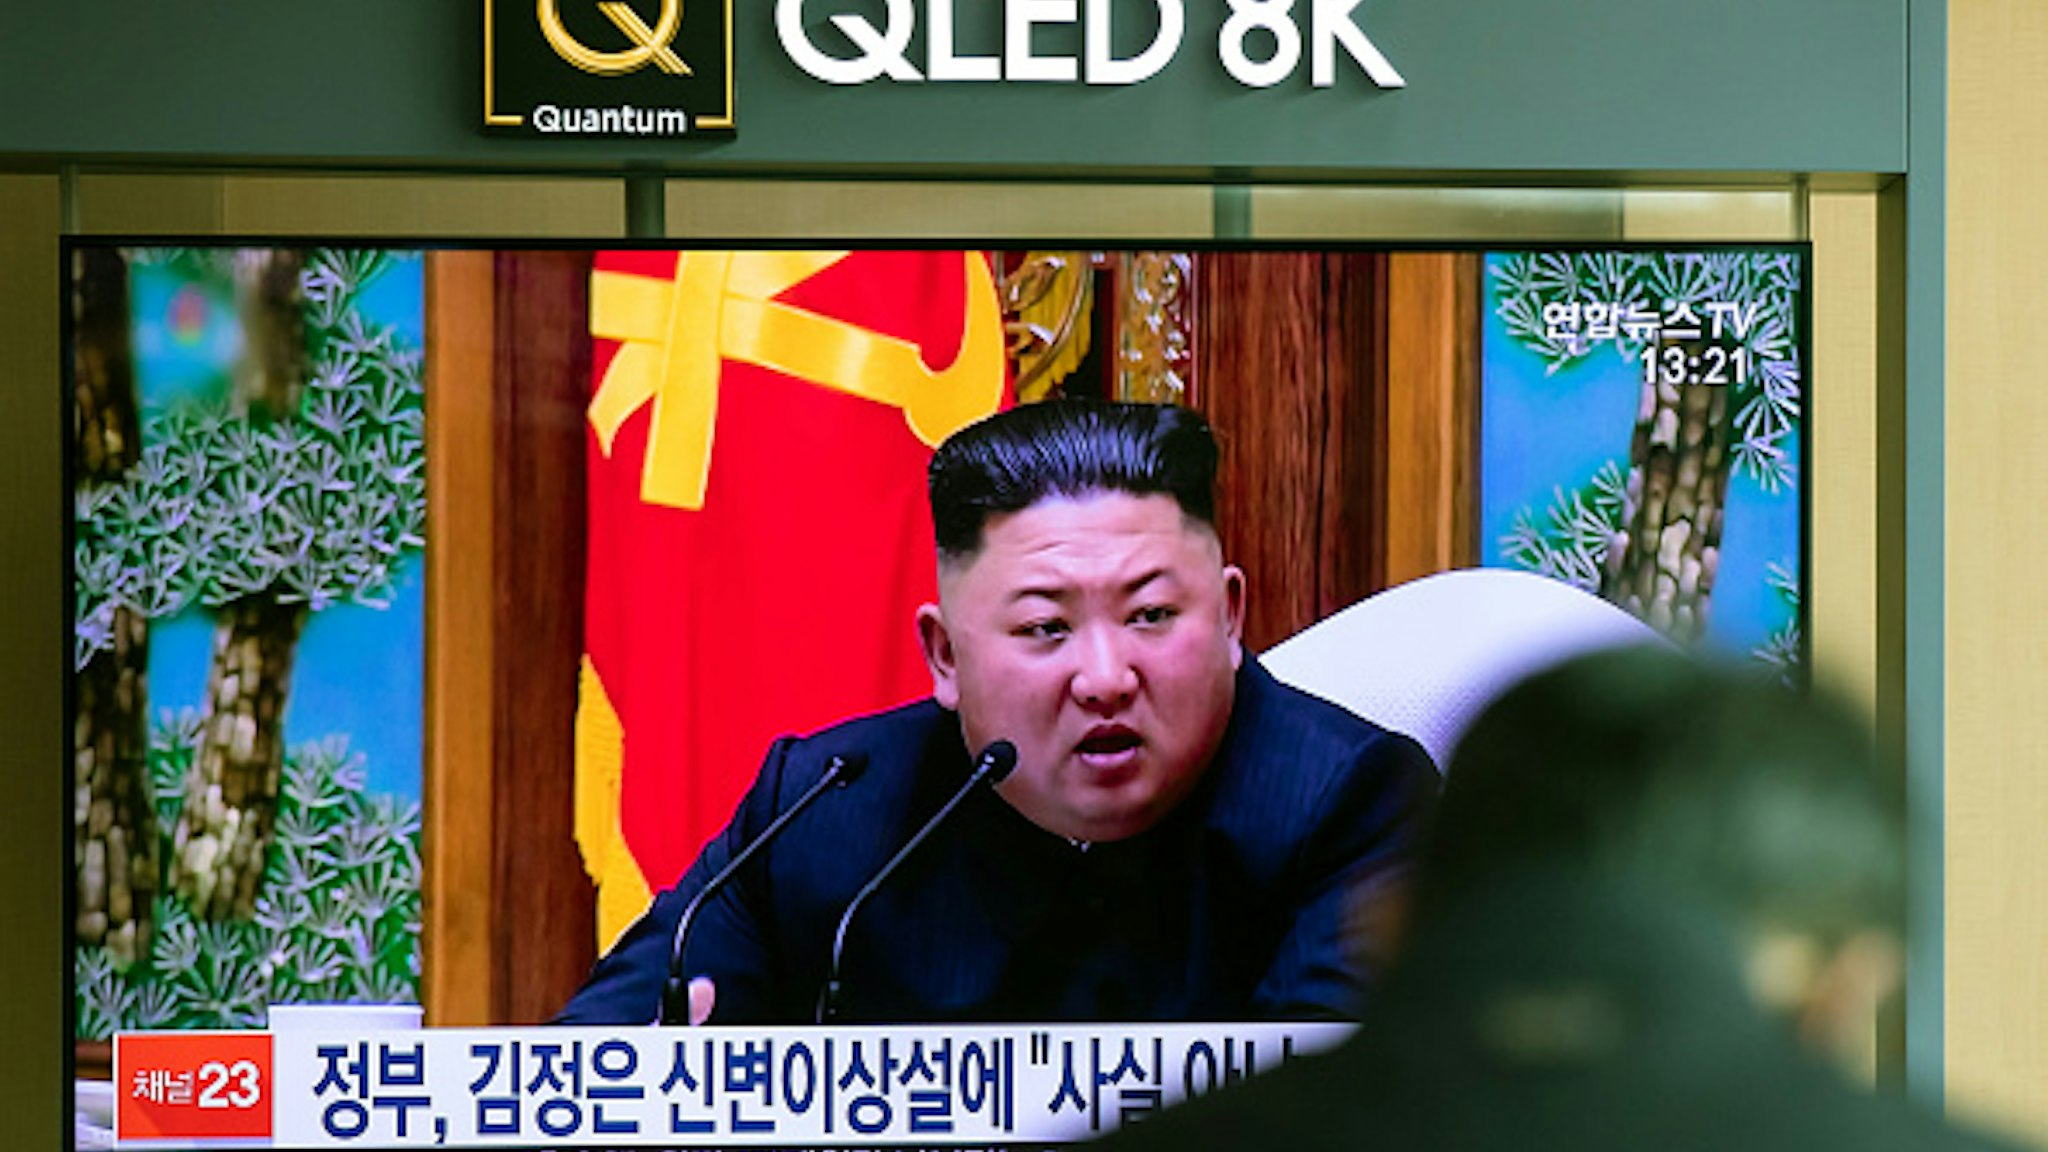 A screen displays a broadcast of a news report featuring North Korean leader Kim Jong Un at Seoul Station in Seoul, South Korea, on Tuesday, April 21, 2020. The U.S. is seeking details about Kim's health after receiving information that the North Korean leader was in critical condition after undergoing cardiovascular surgery last week, a U.S. official said.